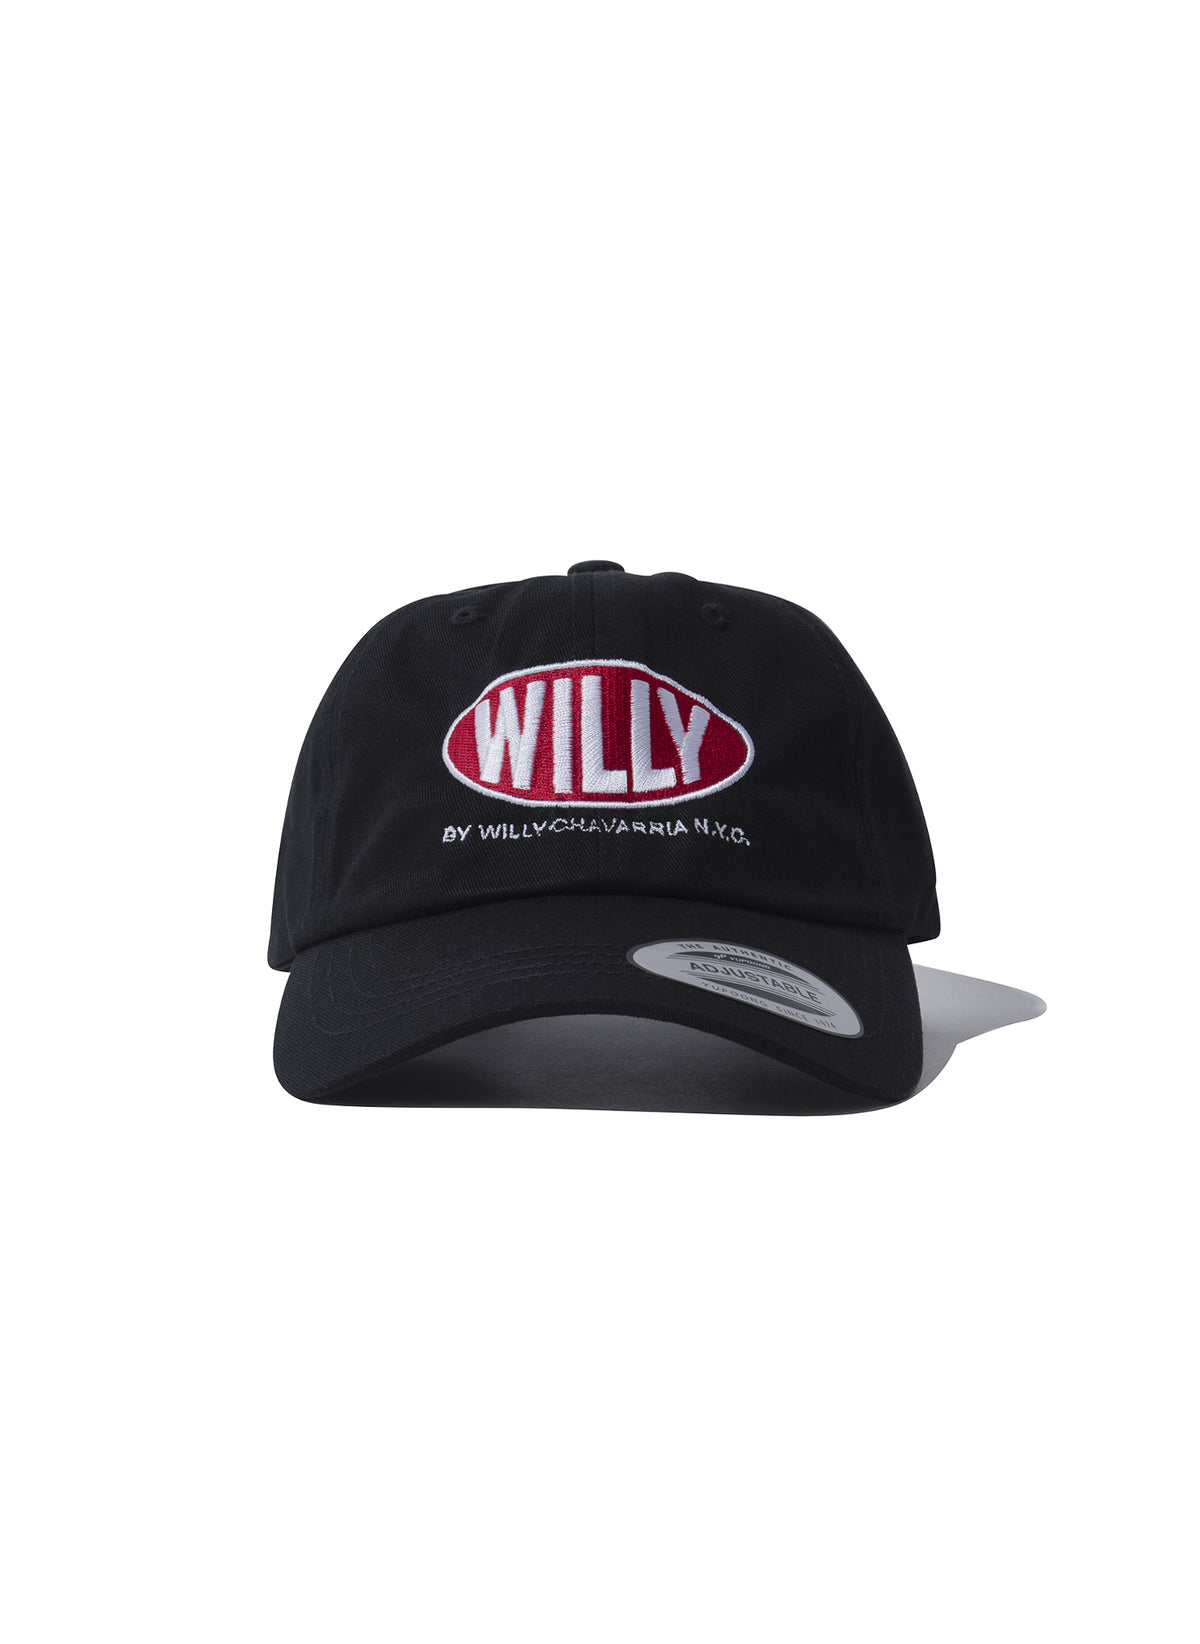 <span style="color: #f50b0b;">Last One</span> WILLY CHAVARRIA / WILLY LOGO CAP 2 BLACK